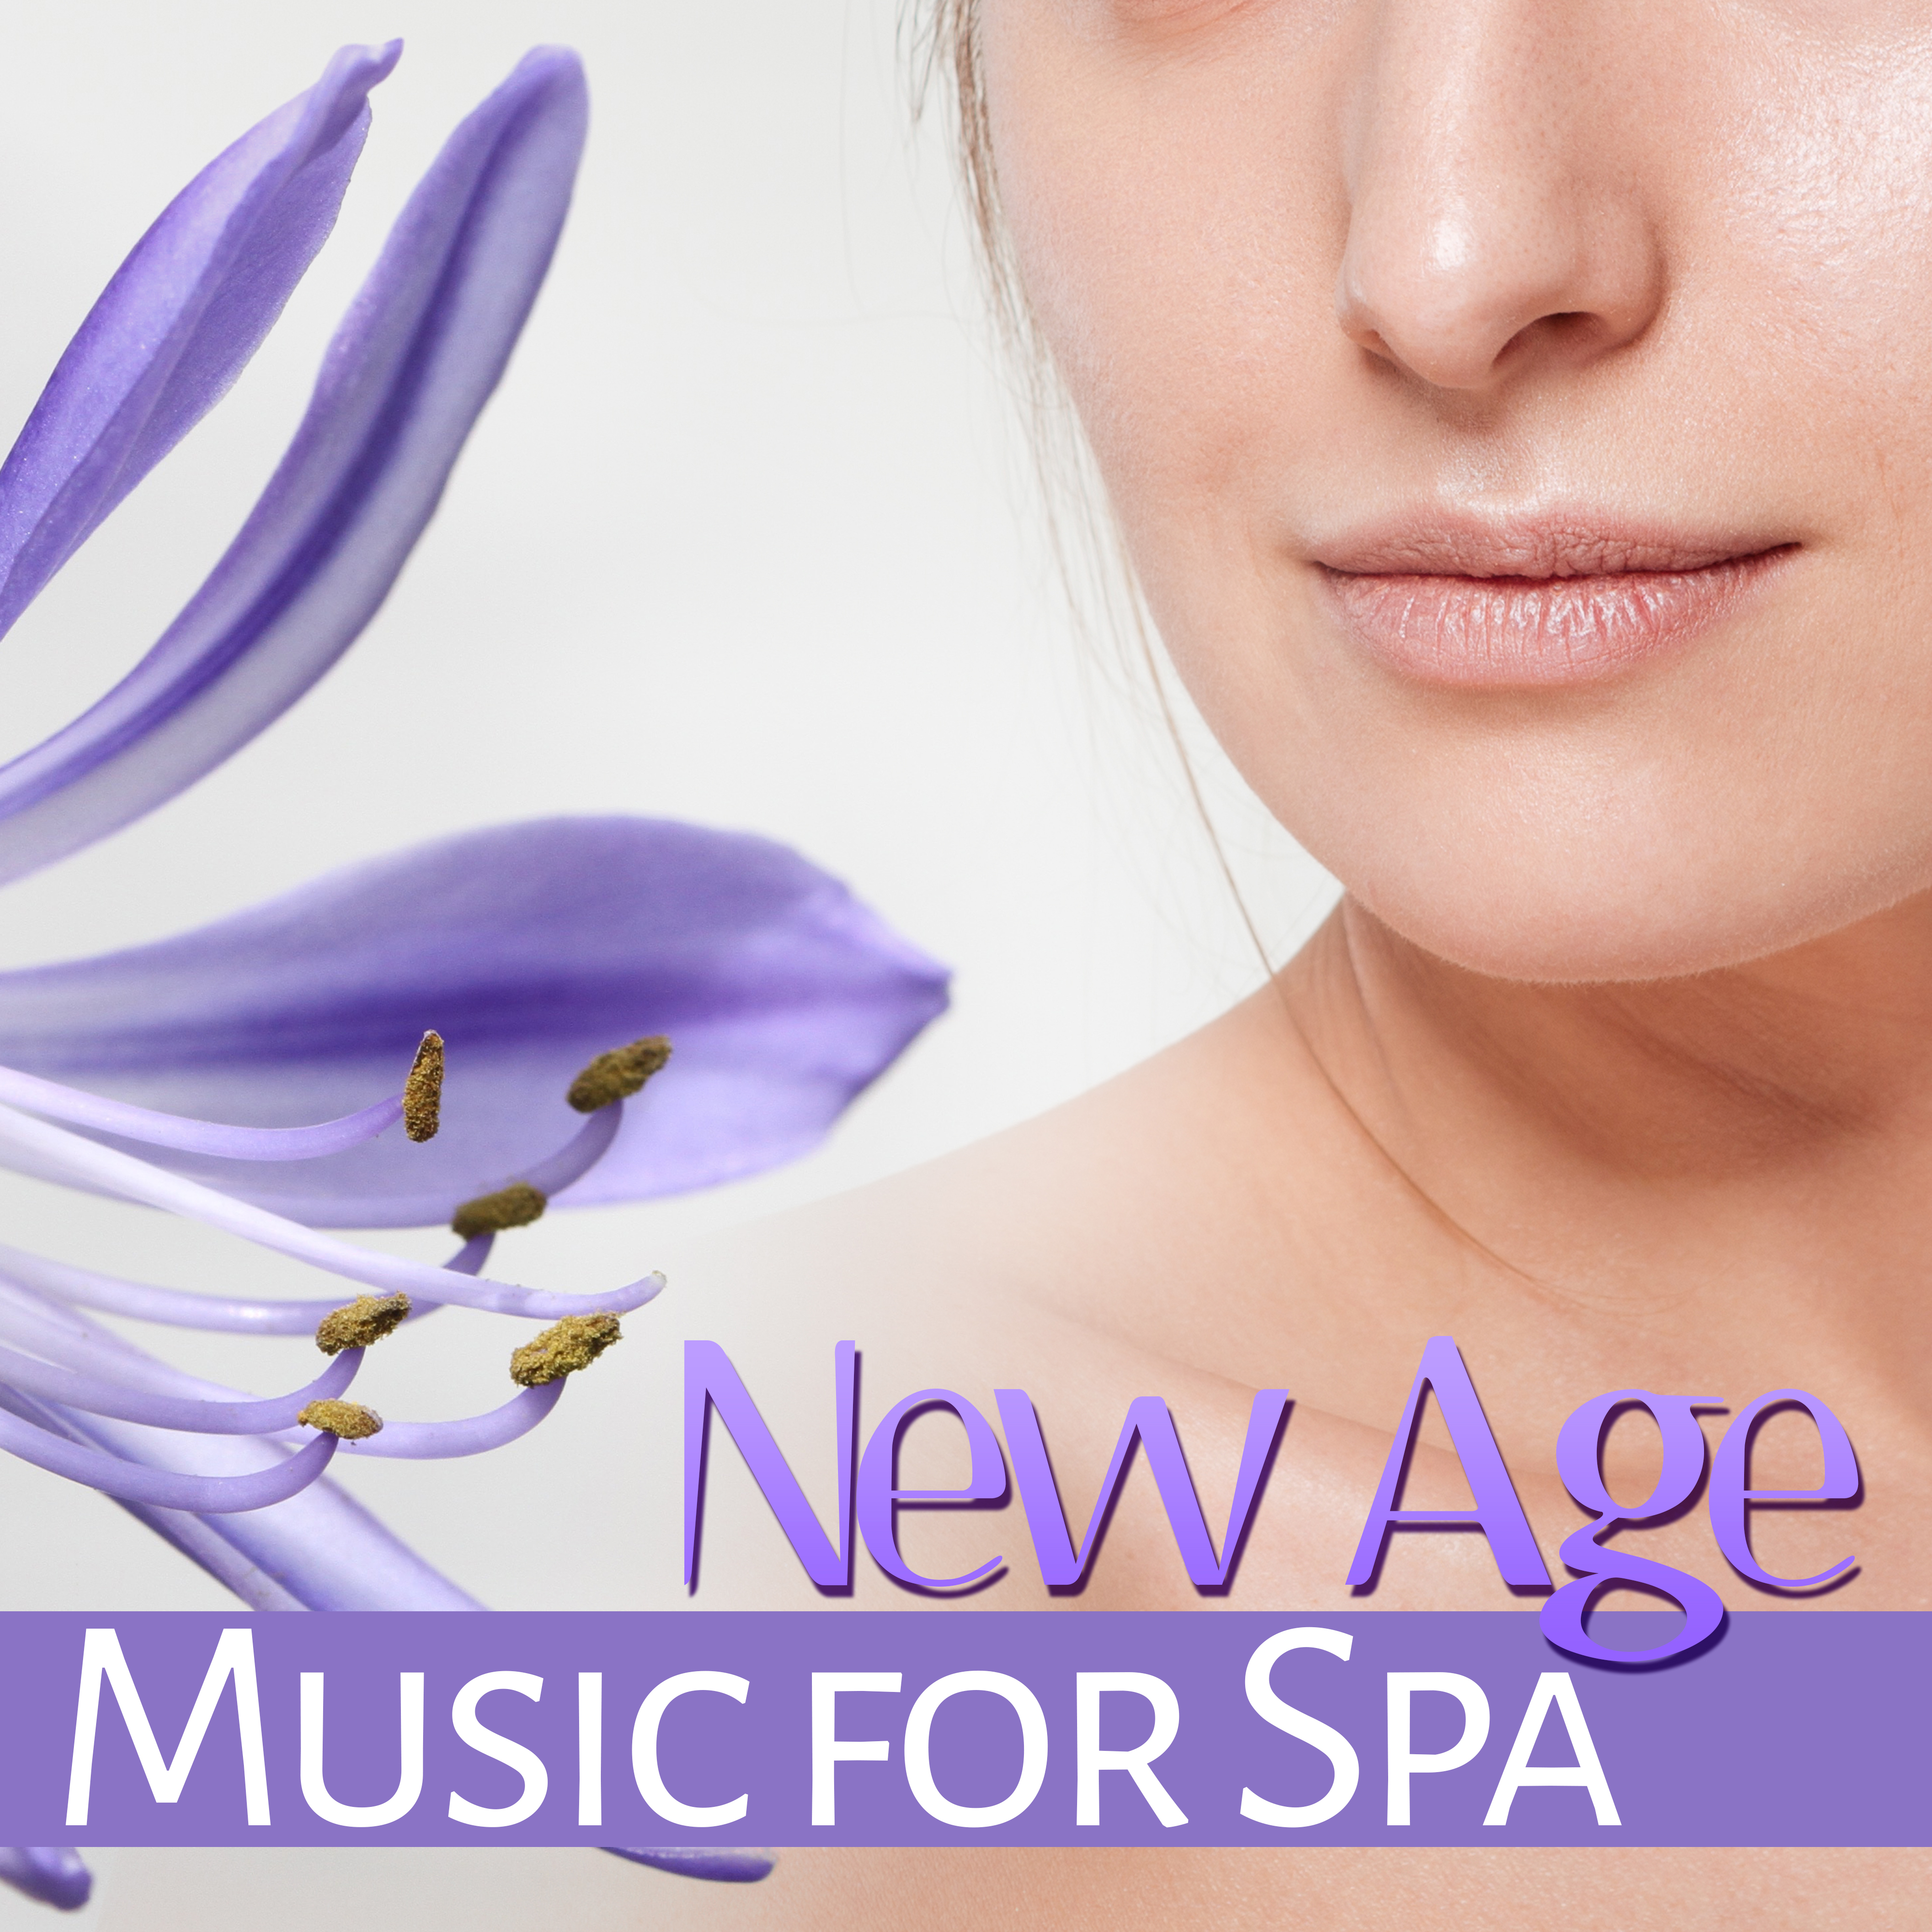 New Age Music for Spa  Calm Down, Anti Stress Sounds for Massage, Wellness, Pure Sleep, Relief, Relaxation, Nature Sounds